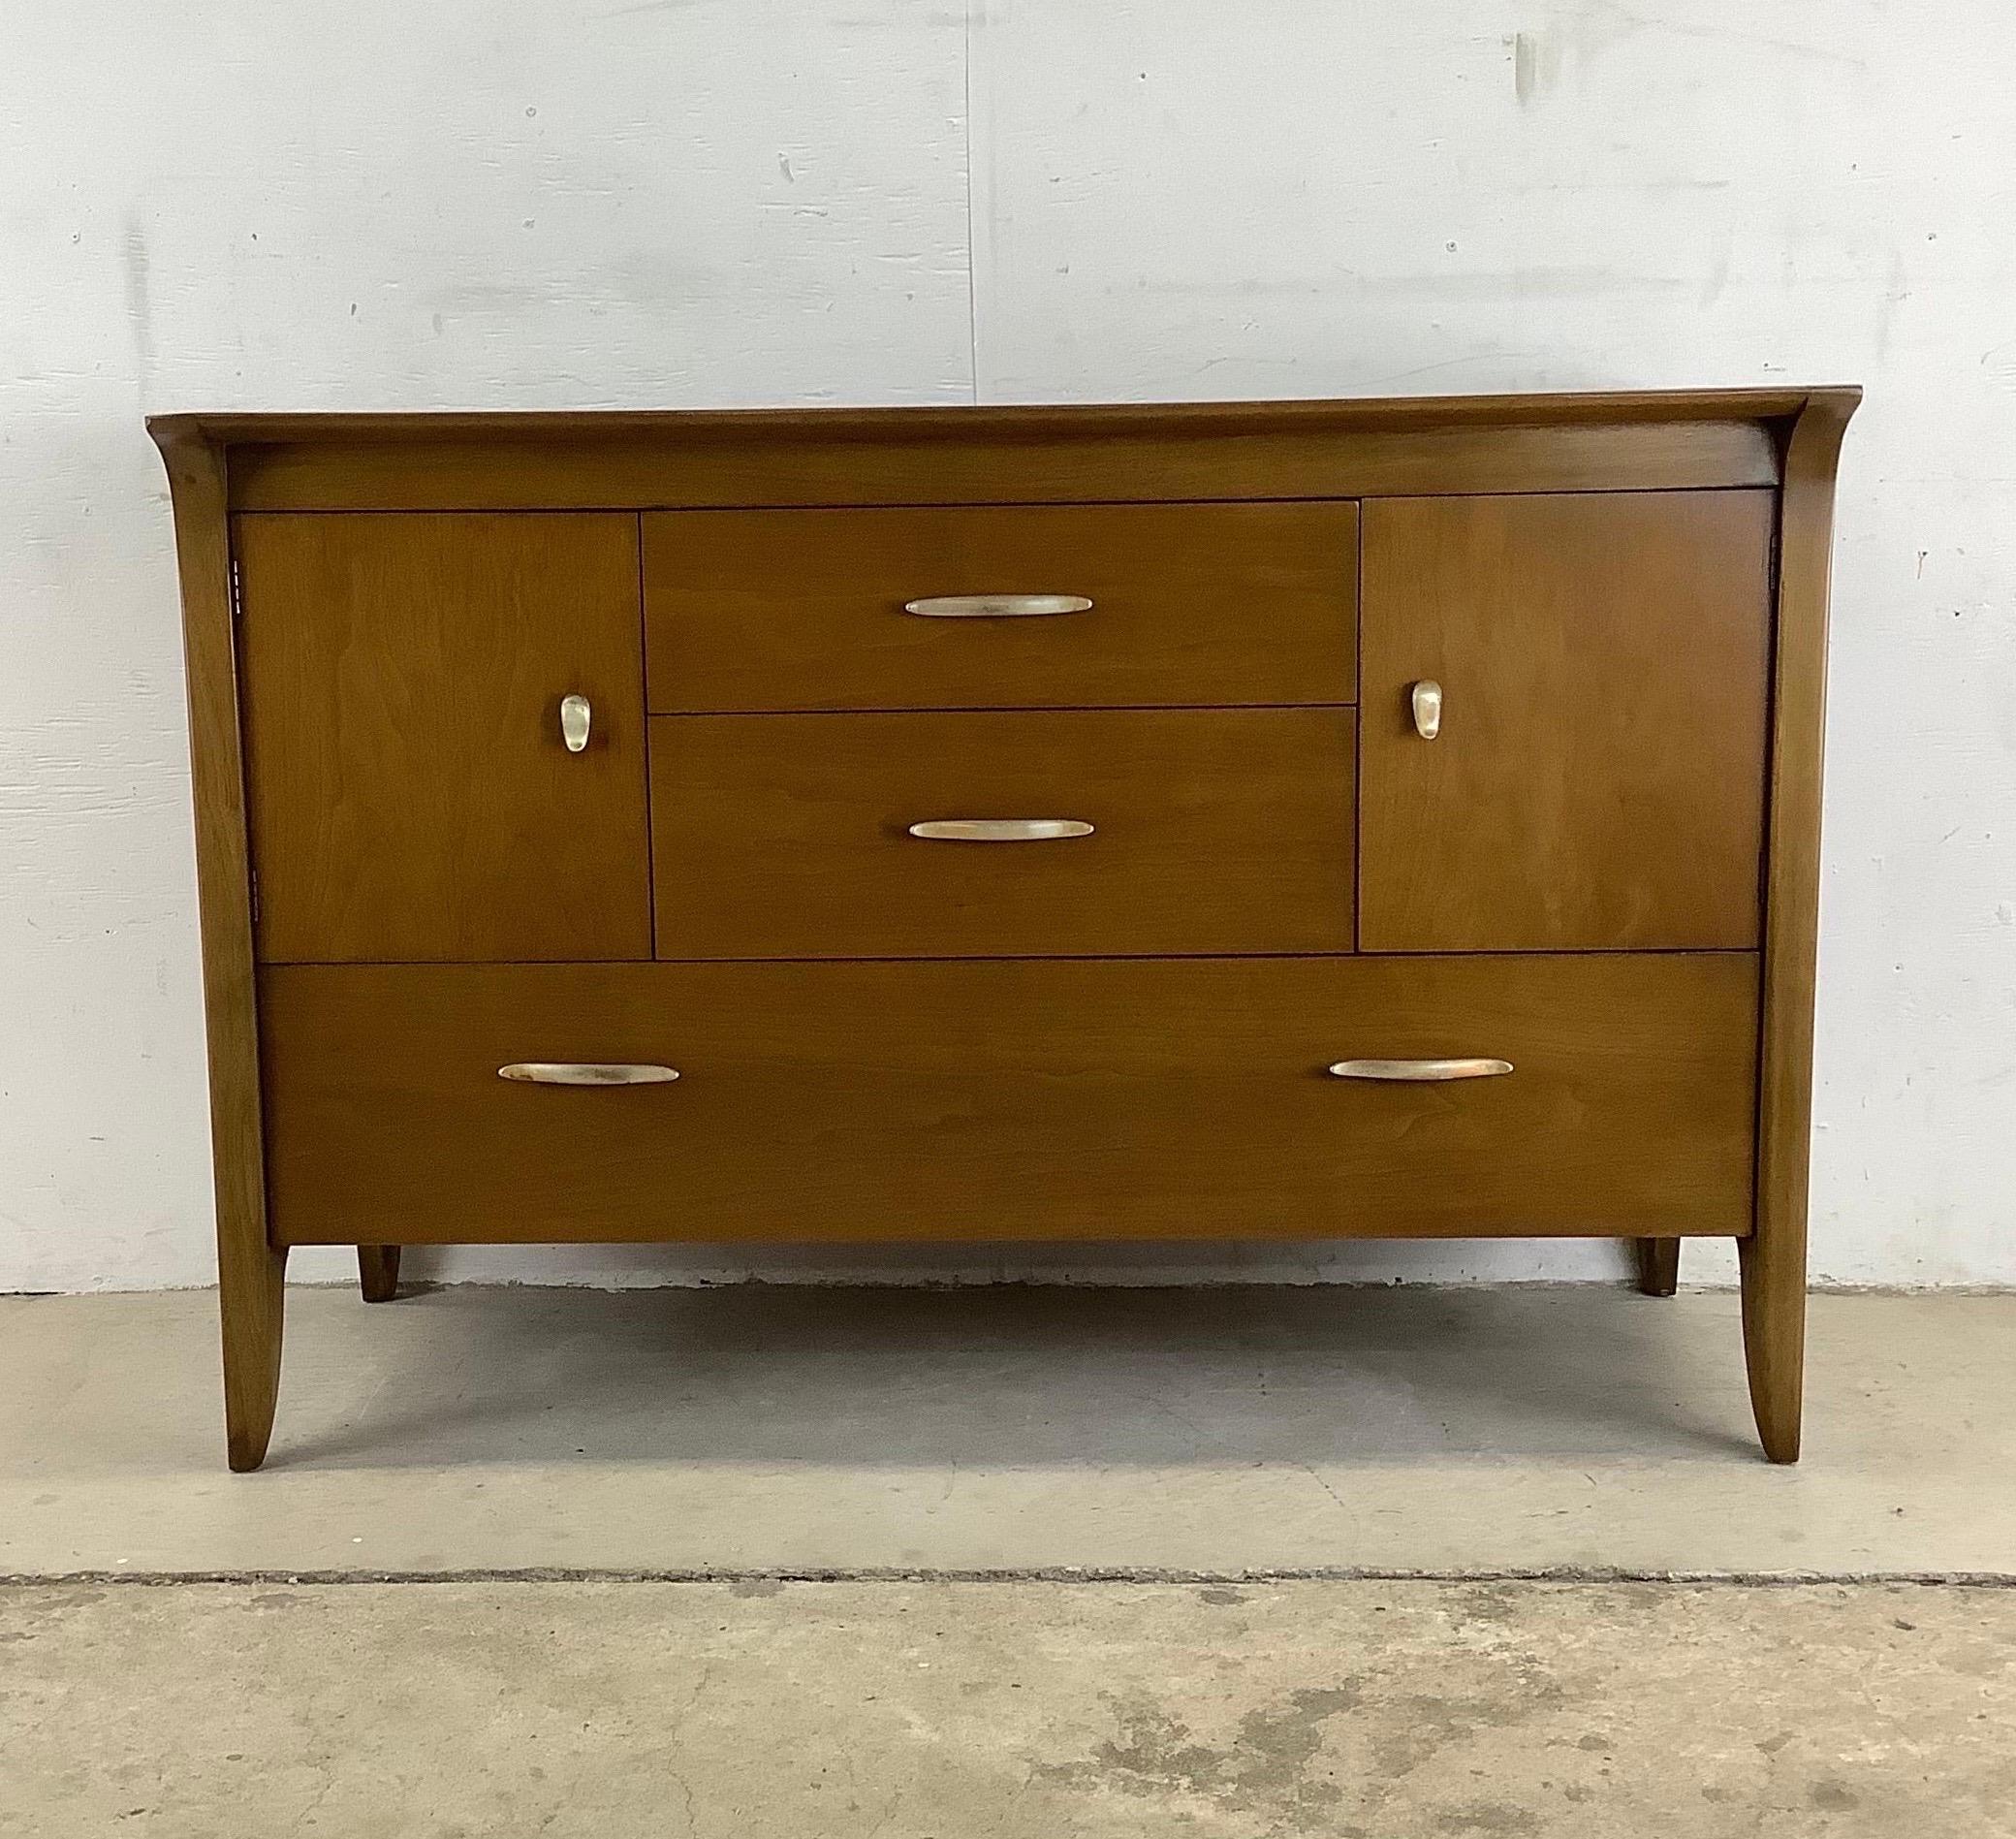 This impressive Mid-Century Modern sideboard with breakfront display topper was designed by John Van Koert for Drexel's Profile line of furniture. Original wood finish is in great condition with spacious interior storage and unique metal pulls.